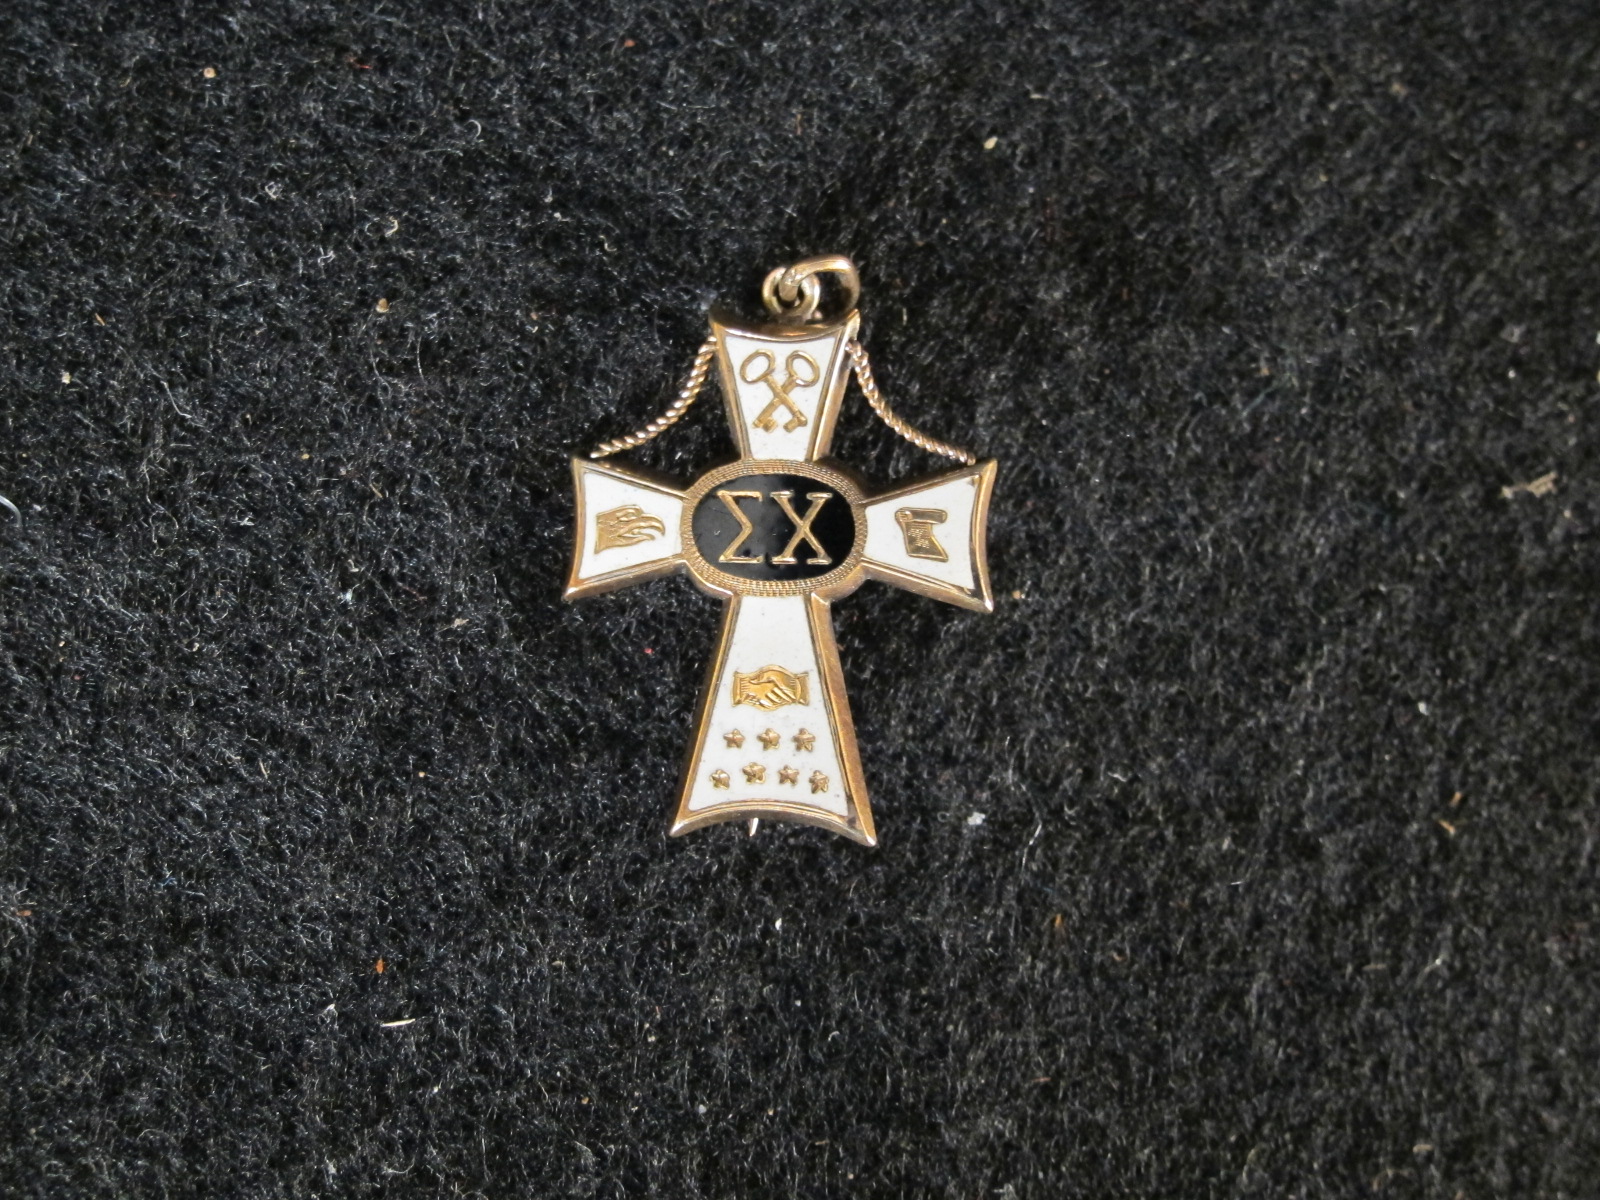 Sigma Chi Fraternity Pin, c.1858 | Dickinson College